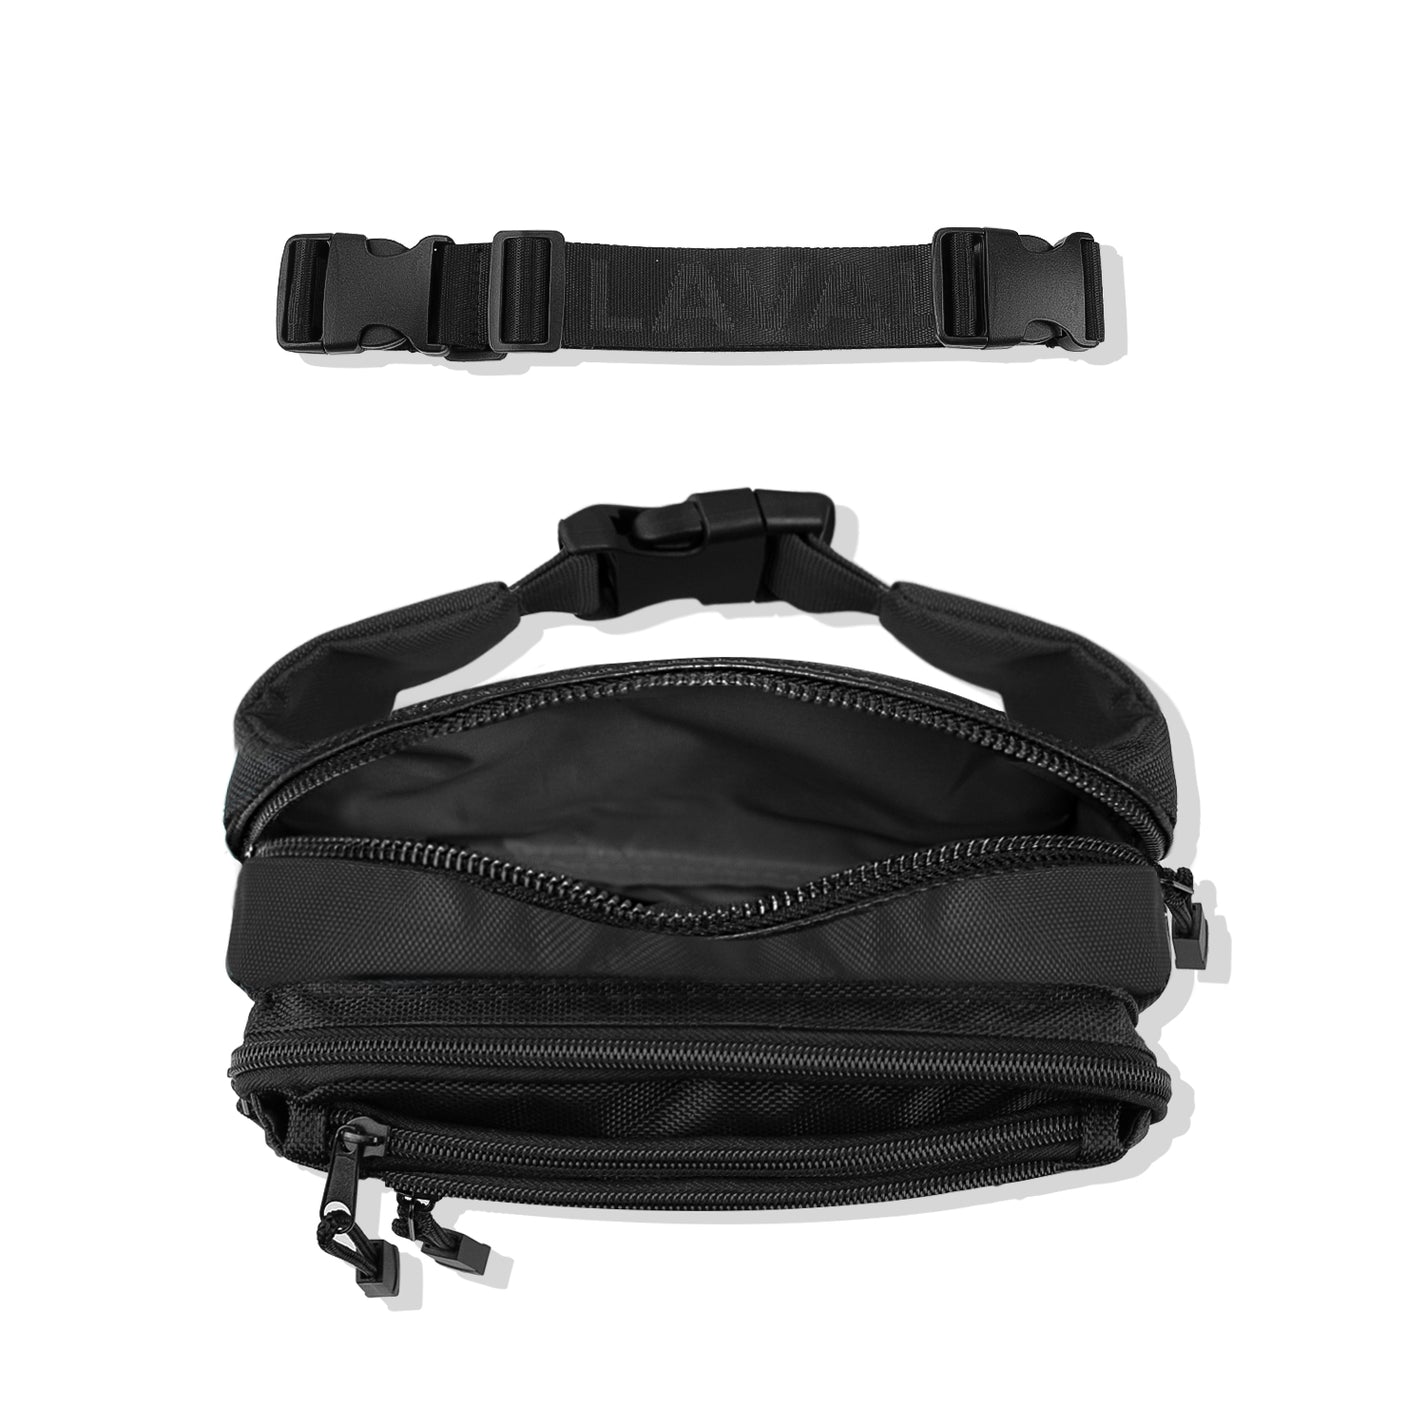 THE UTILITY BAG CORE MIDNIGHT BLACK – LAVALOFFICIAL